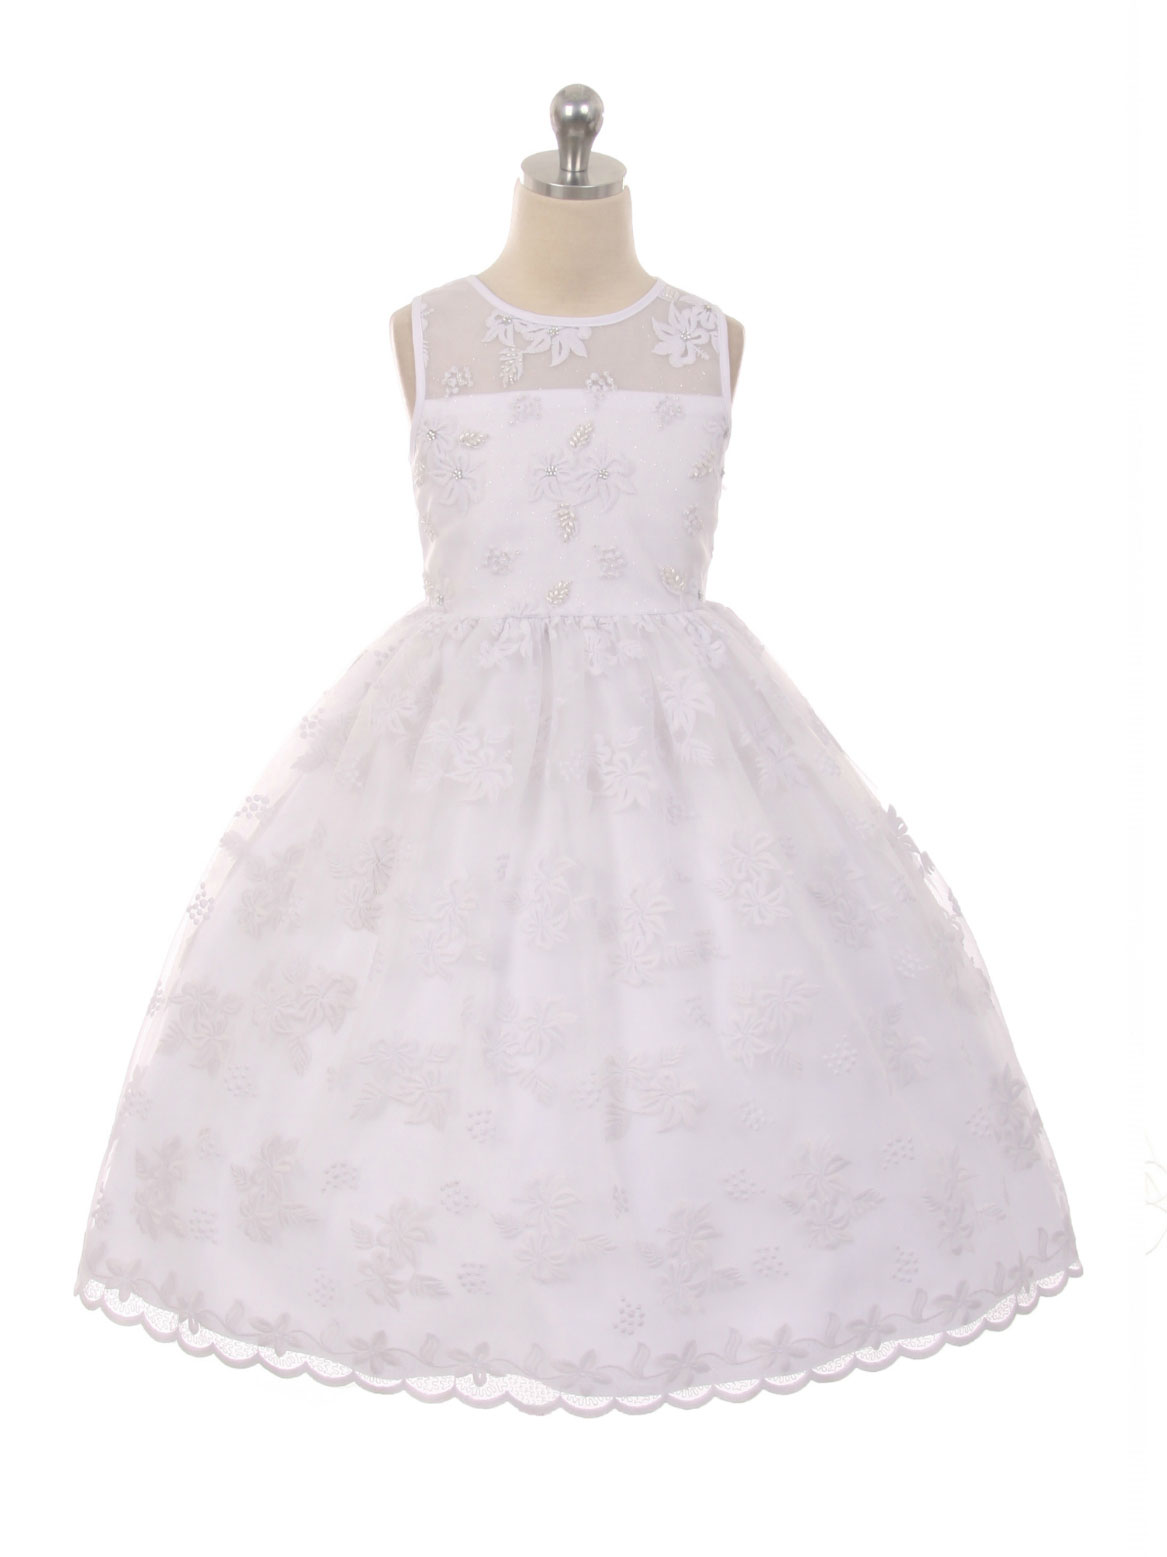 RK_1037W - Girls Dress Style 1037 - Lace Dress with Floral and Pearl ...